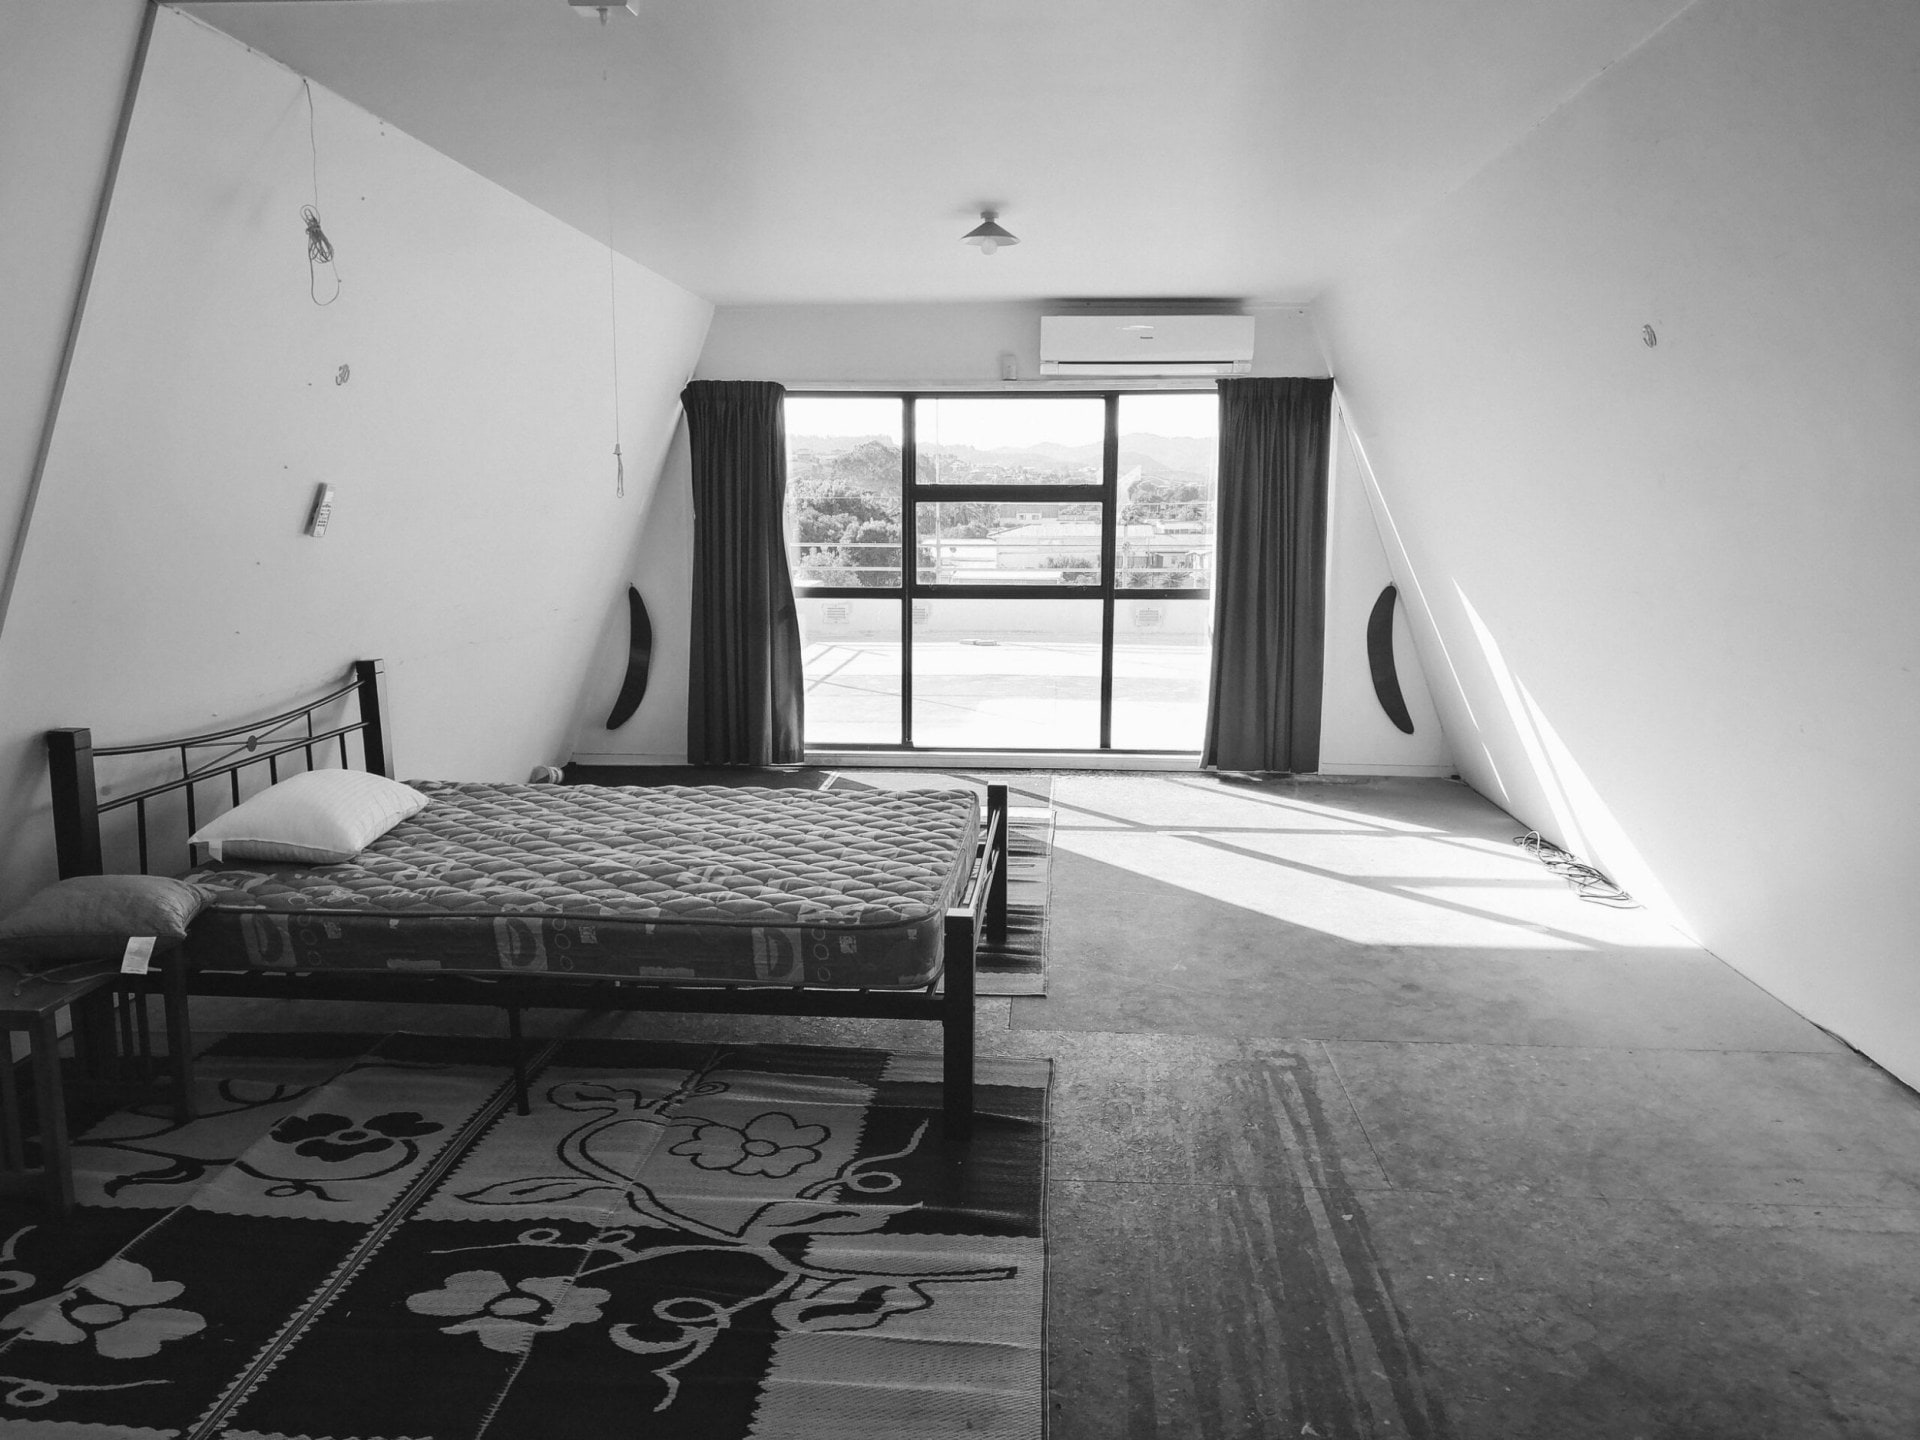 Image in black and white of a long bedroom with metal bed frame to the left